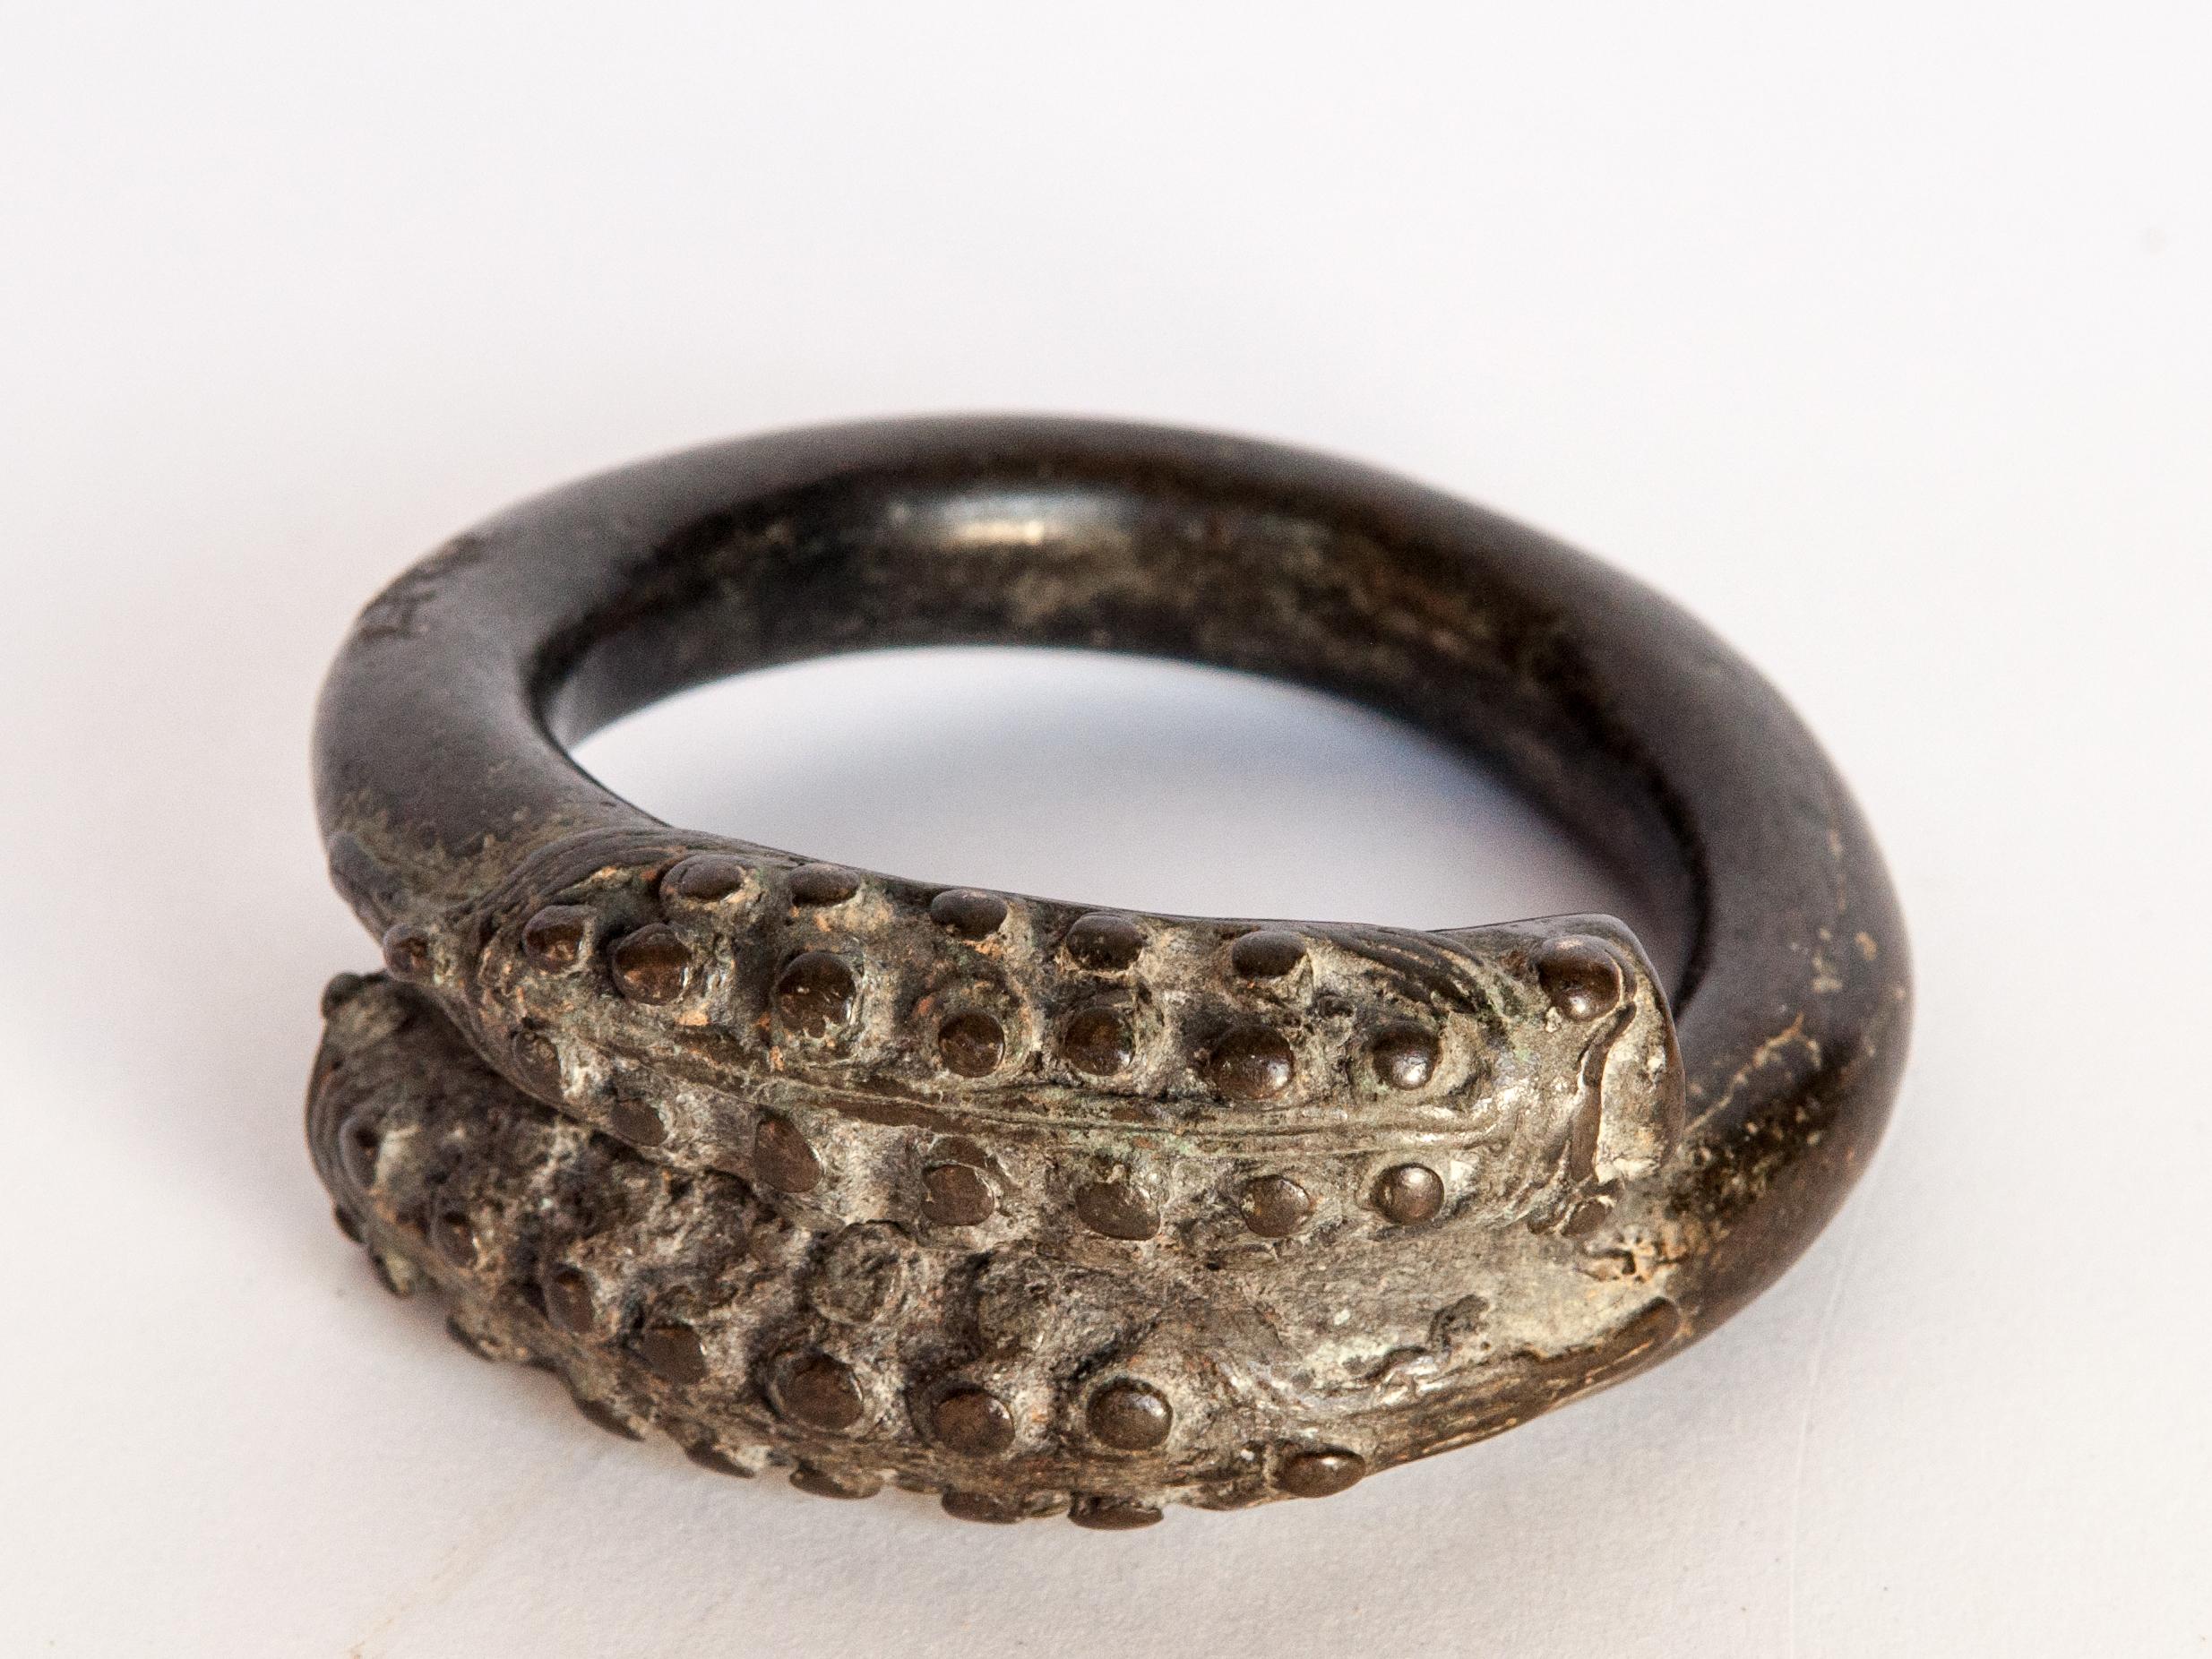 Antique bronze bracelet from Laos with a Naga or Serpent motif, 18th century.
Measurements: Outside diameter 3.75 inches; Inside diameter 2.5” inches; thickness is 1-3/8 inches thick. The weight is 372 grams (approx 13 oz)
It is in good condition.